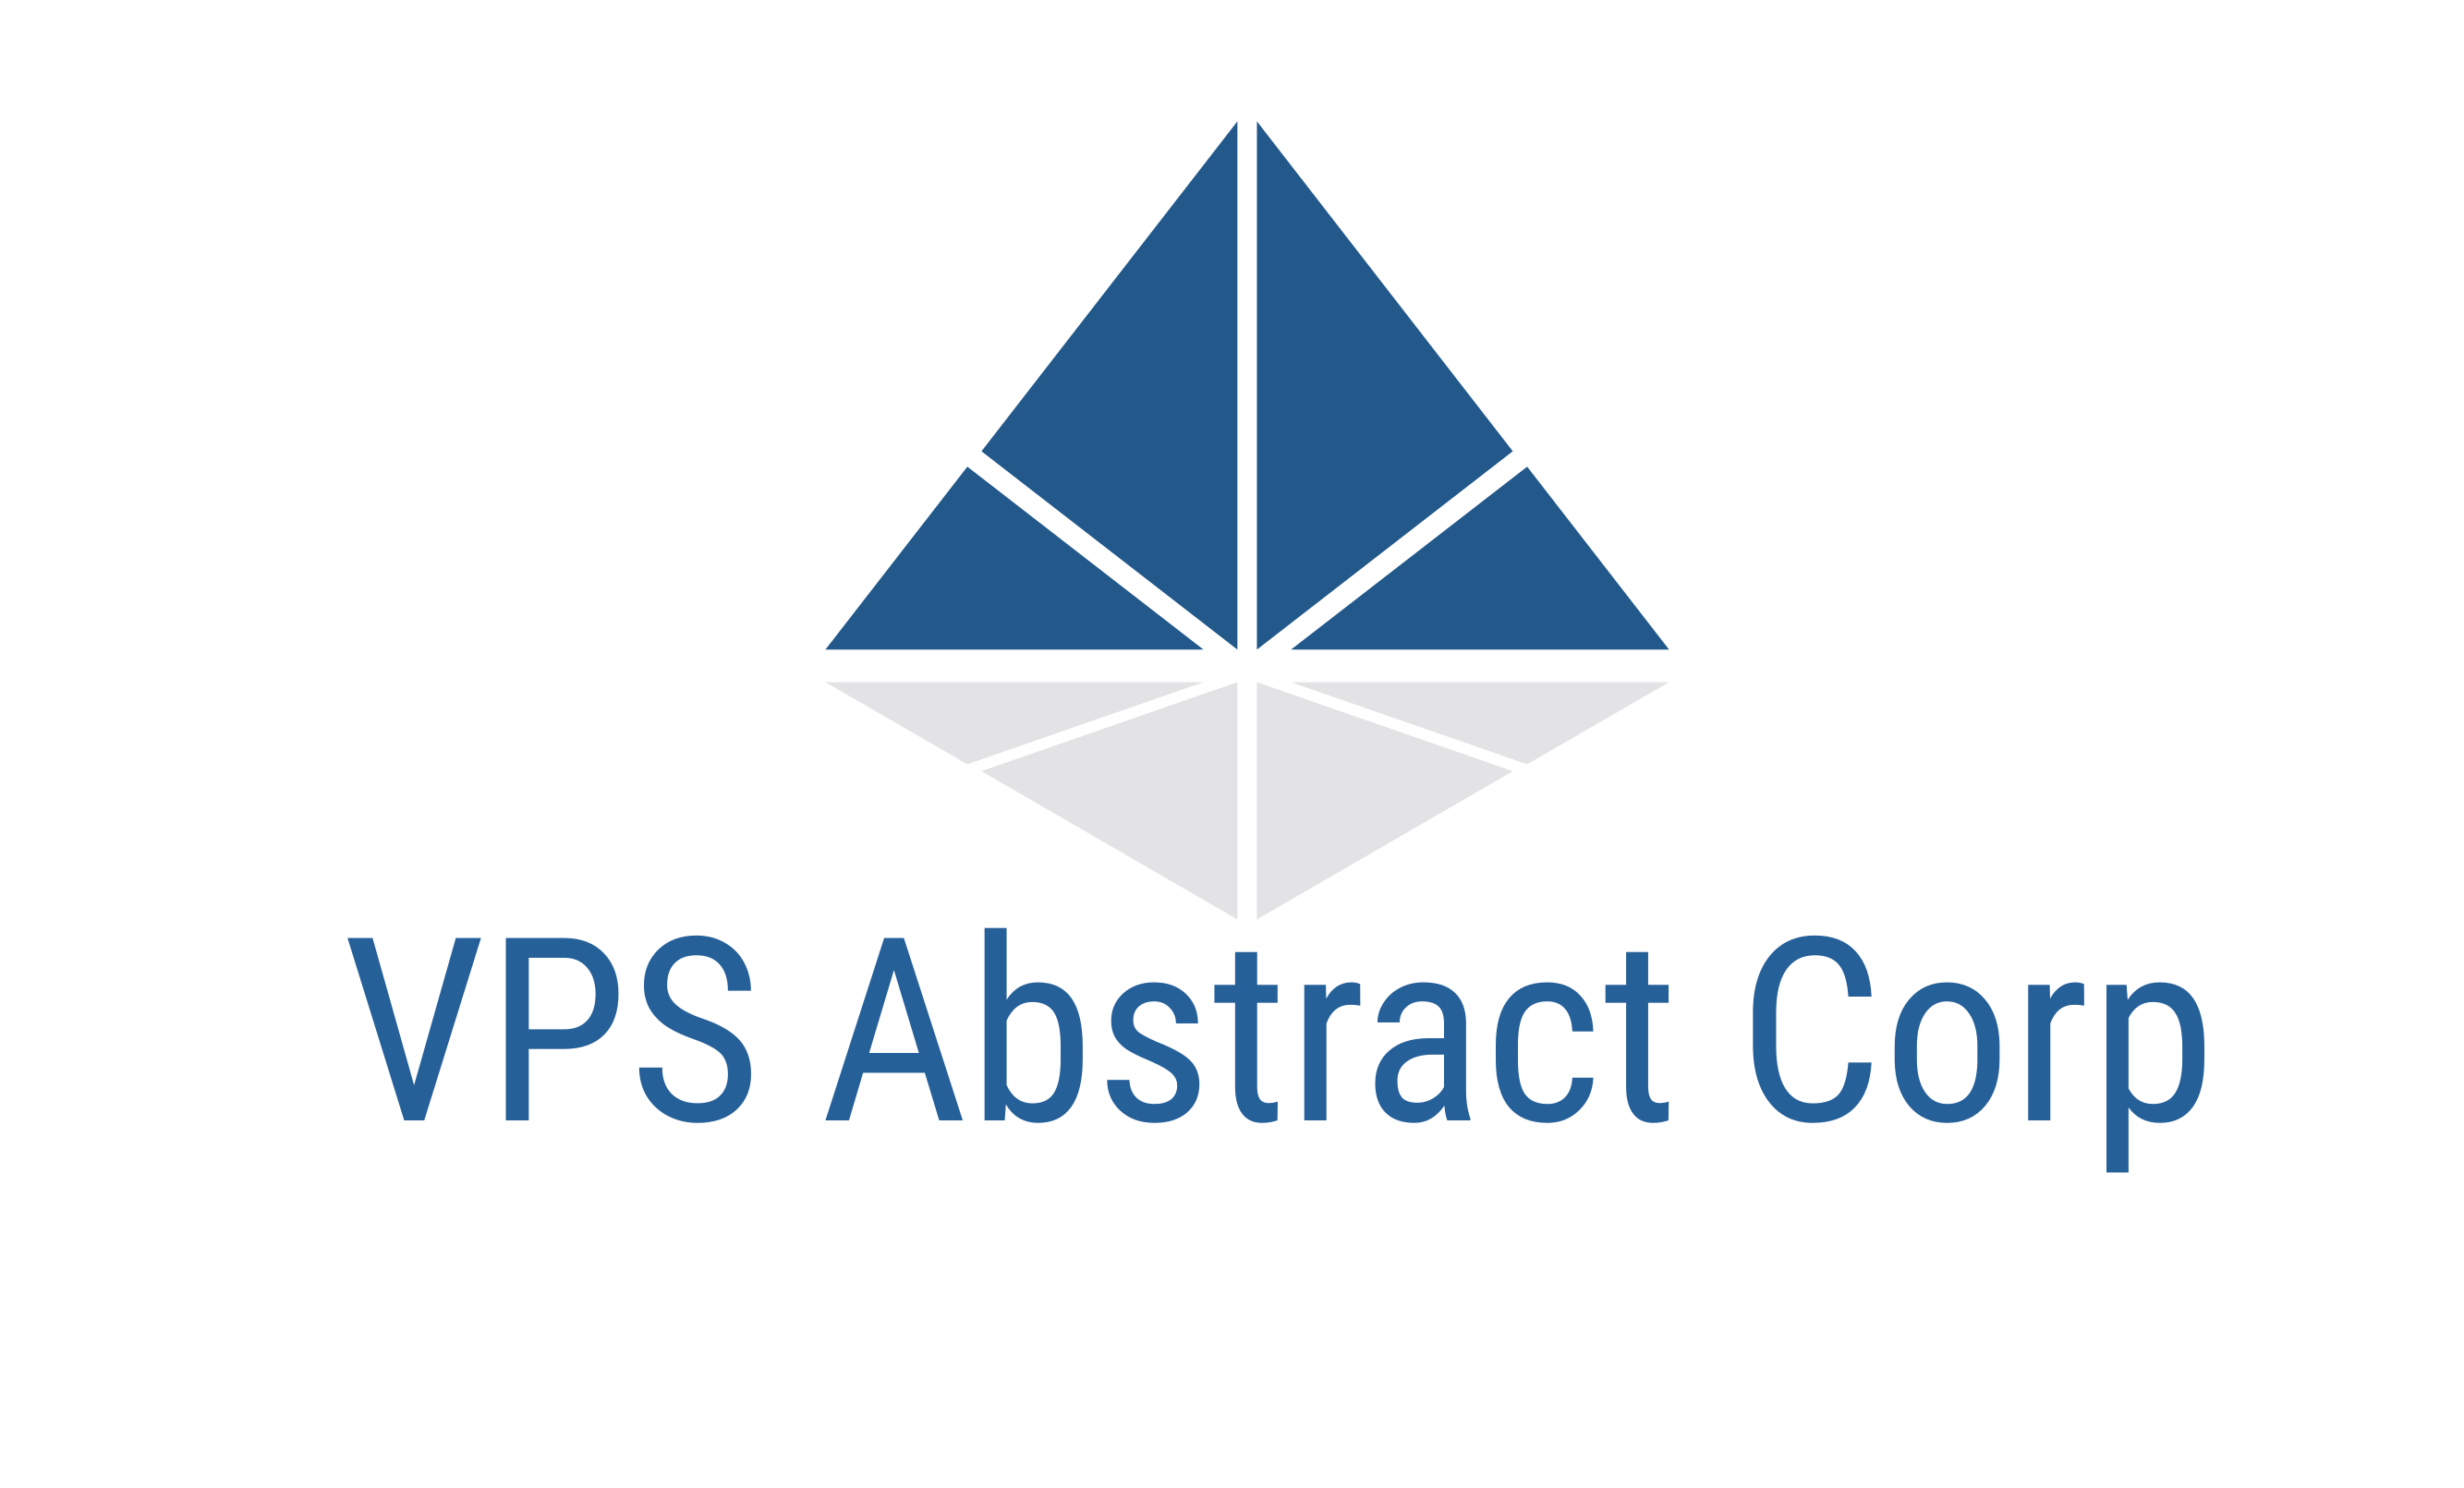 VPS Abstract Corp